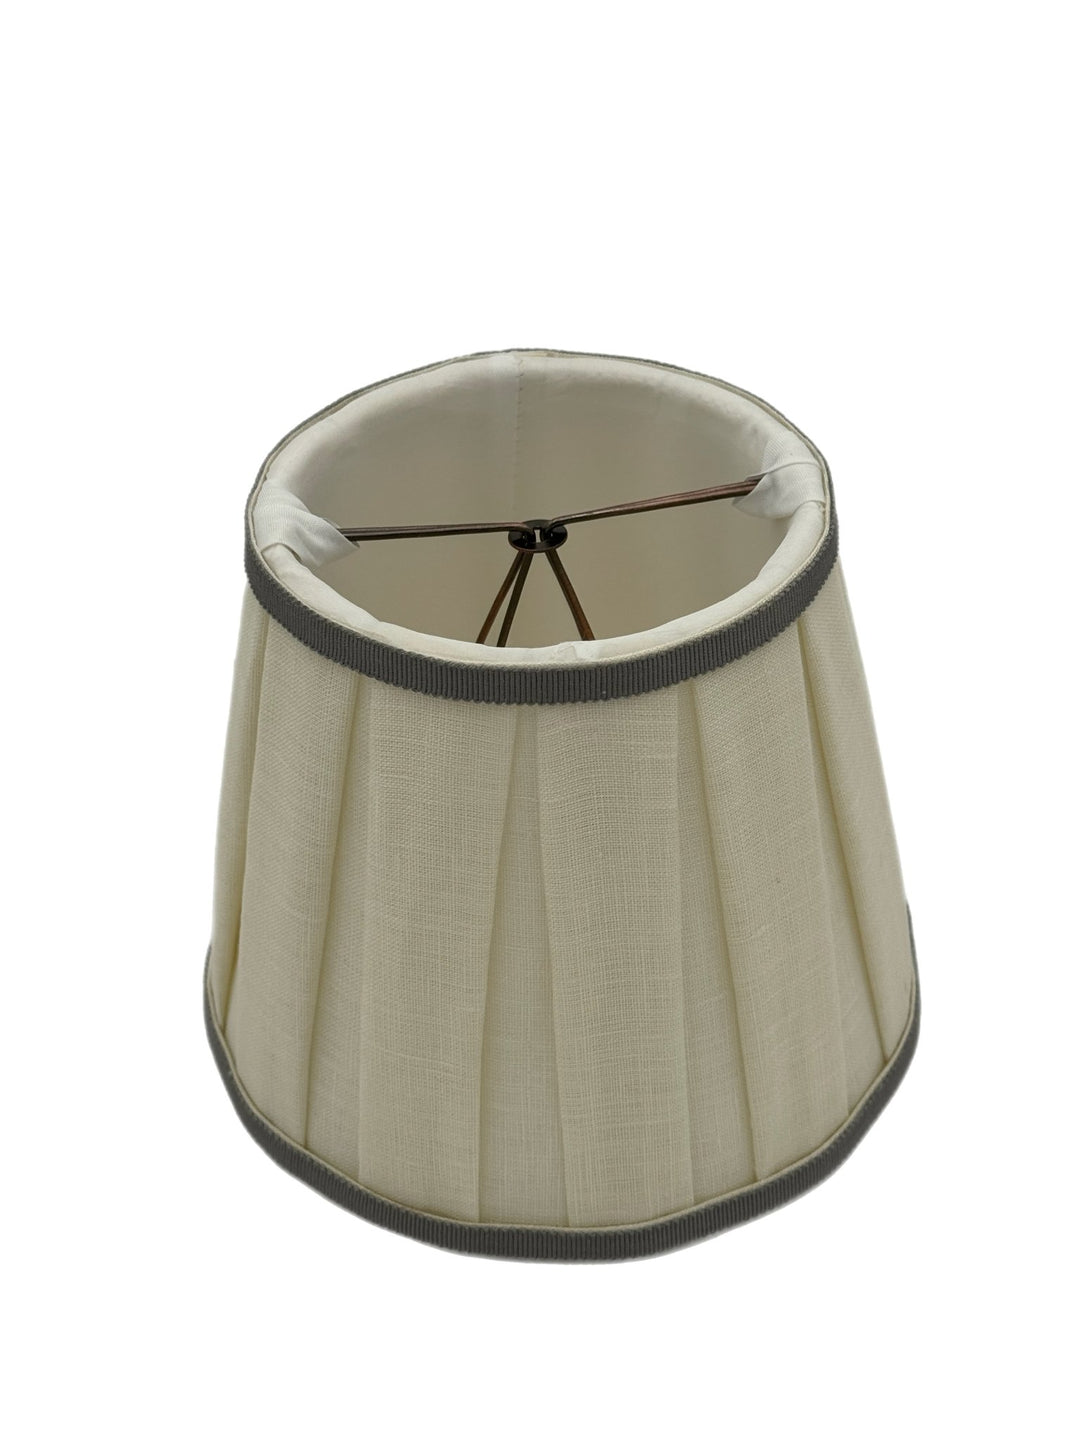 Box Pleat Linen - Empire - Chandelier Shade - Lux Lamp Shades